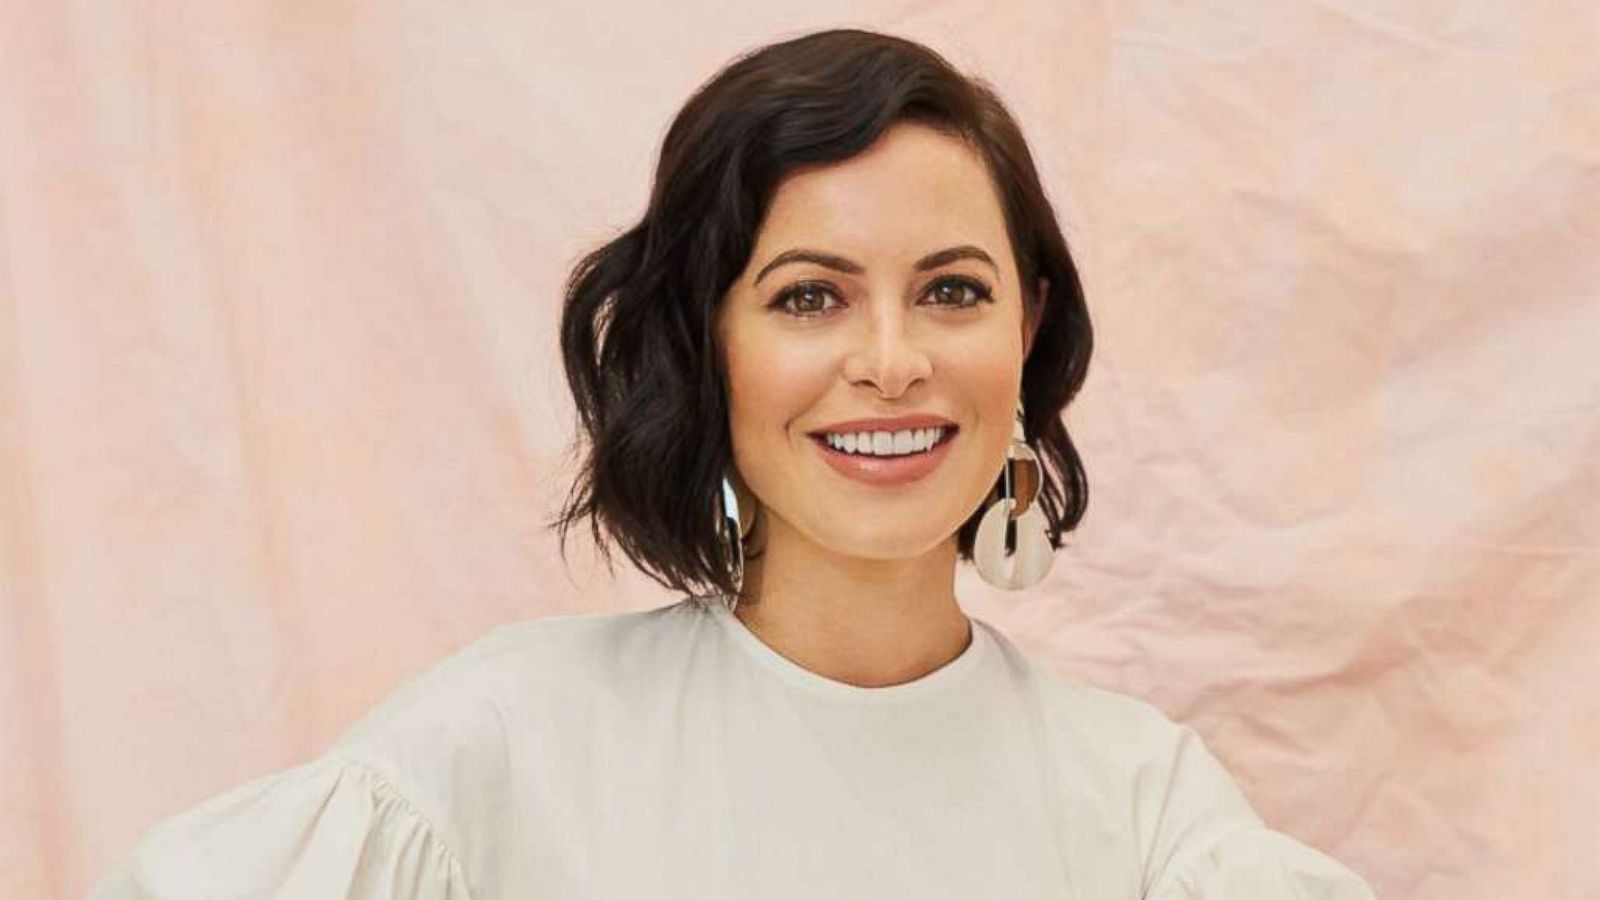 When Nasty Gal Fell, Sophia Amoruso Set About the Business of